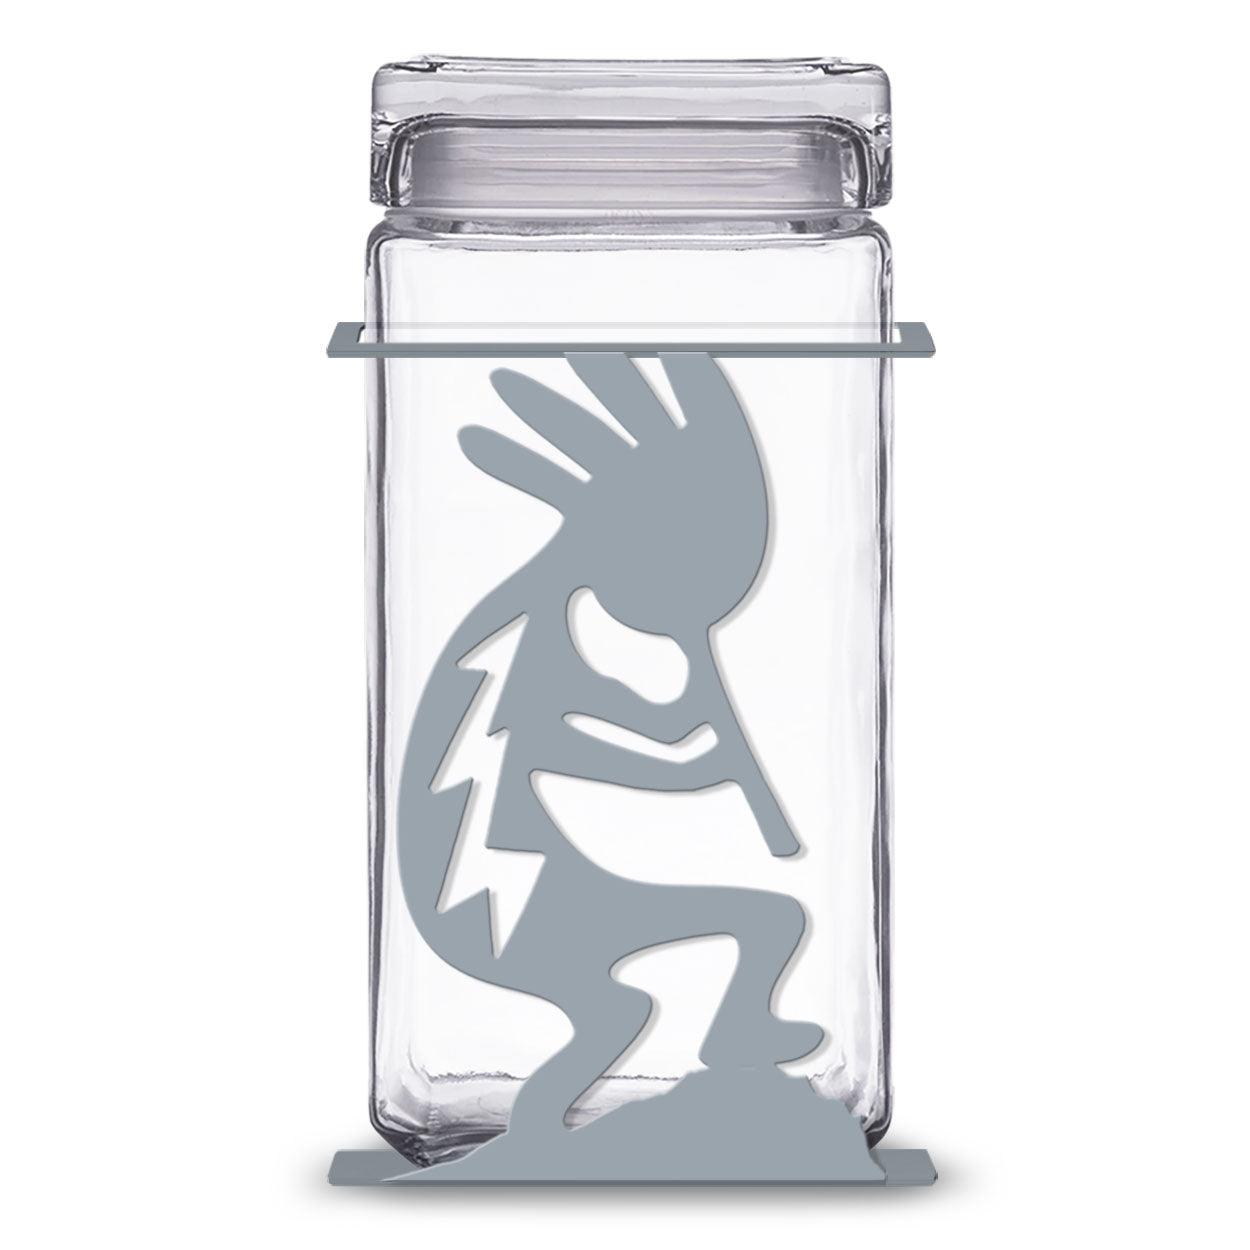 Kokopelli 2 Quart Metal and Glass Kitchen Storage Jar - Choose Color - Specialty Decor by Sunland Home